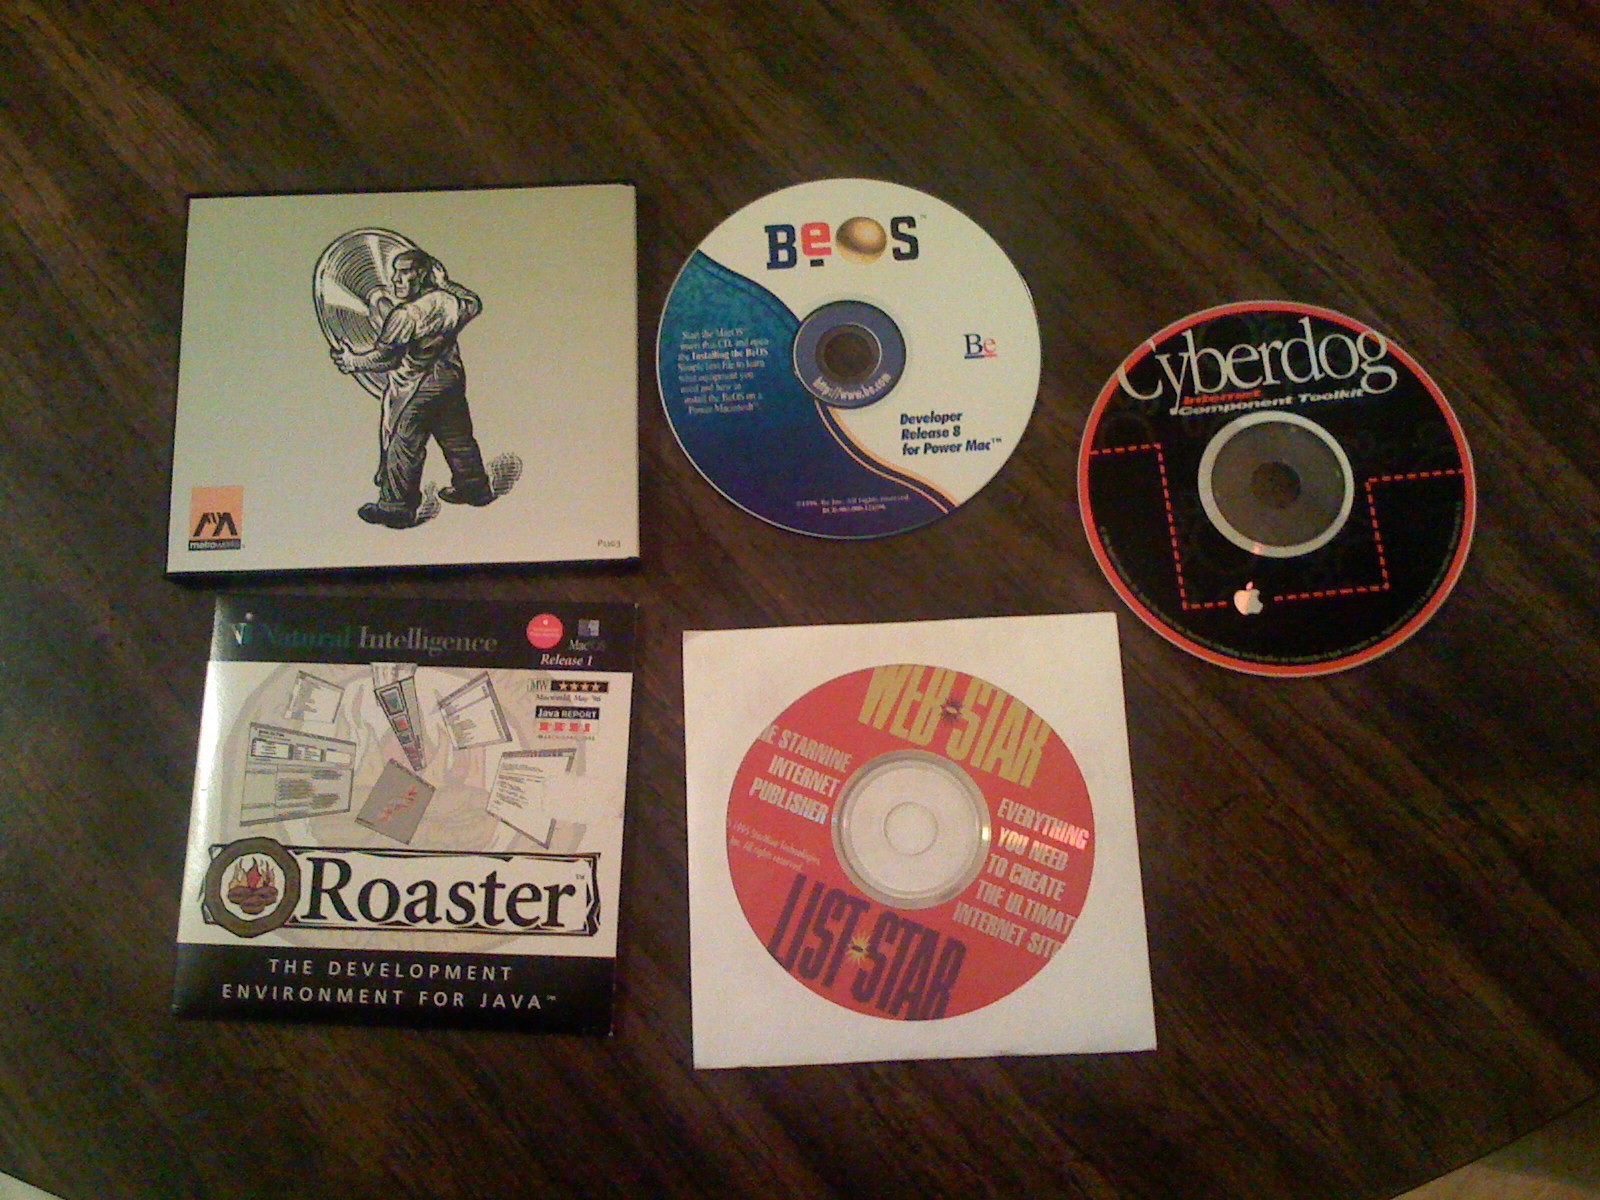 Compact discs and DVDs on a table: CodeWarrior, BeOS, Cyberdog, Roaster, and WebSTAR and ListSTAR.